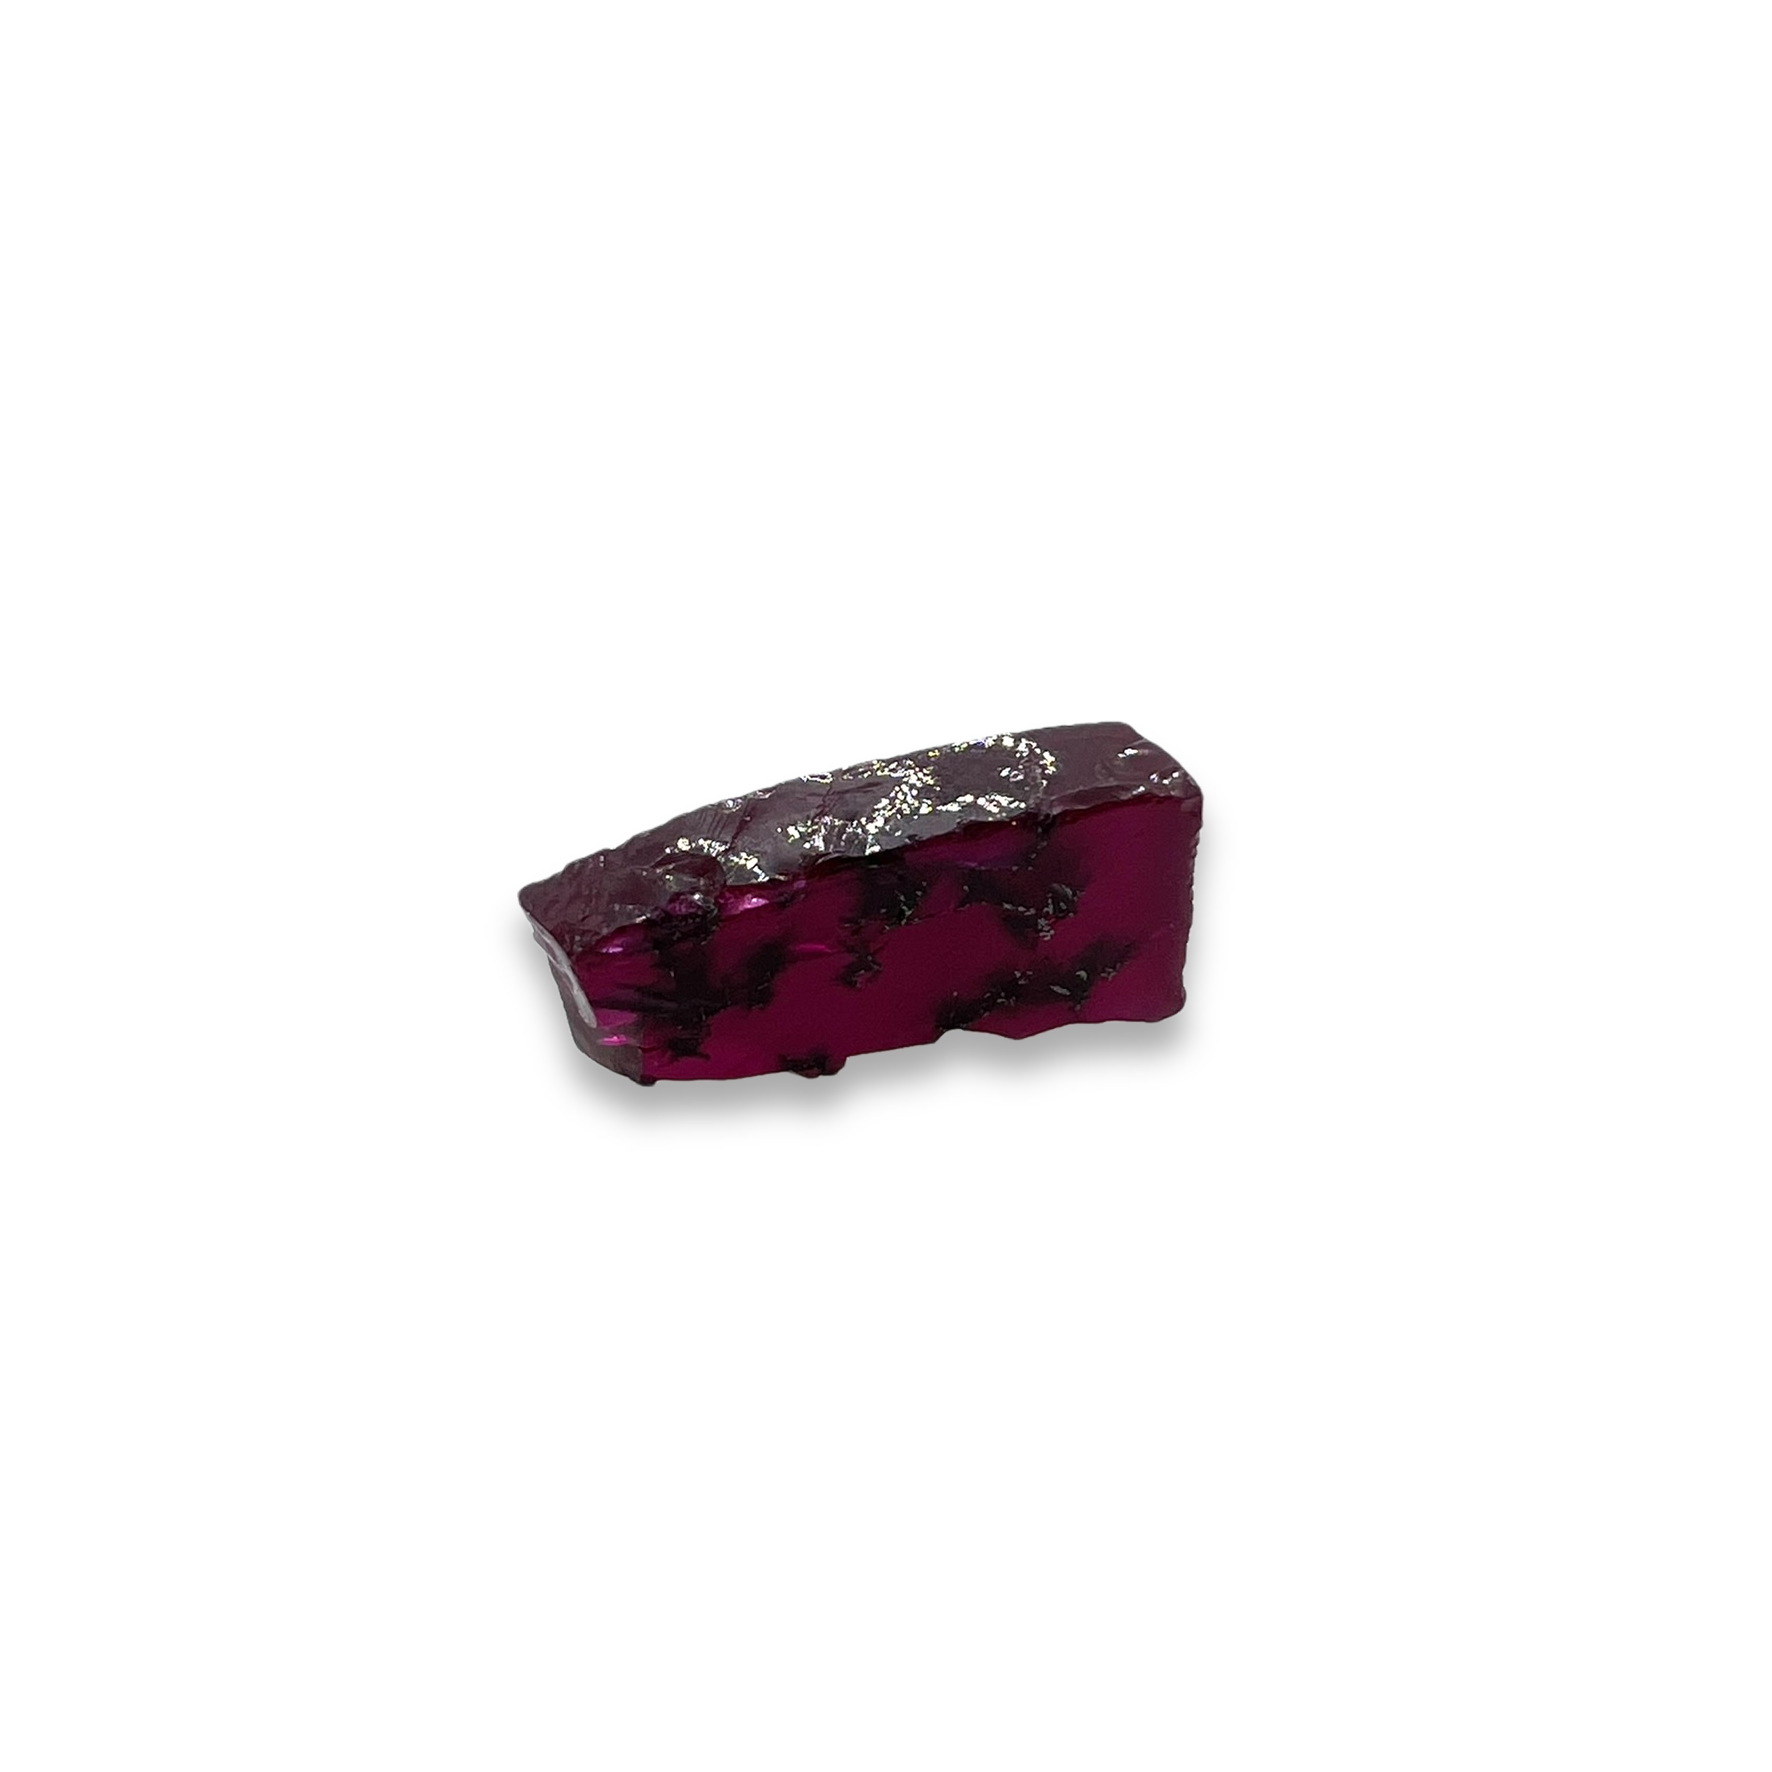 Rough Hydrothermal Ruby from Russia - 5.1 CTW